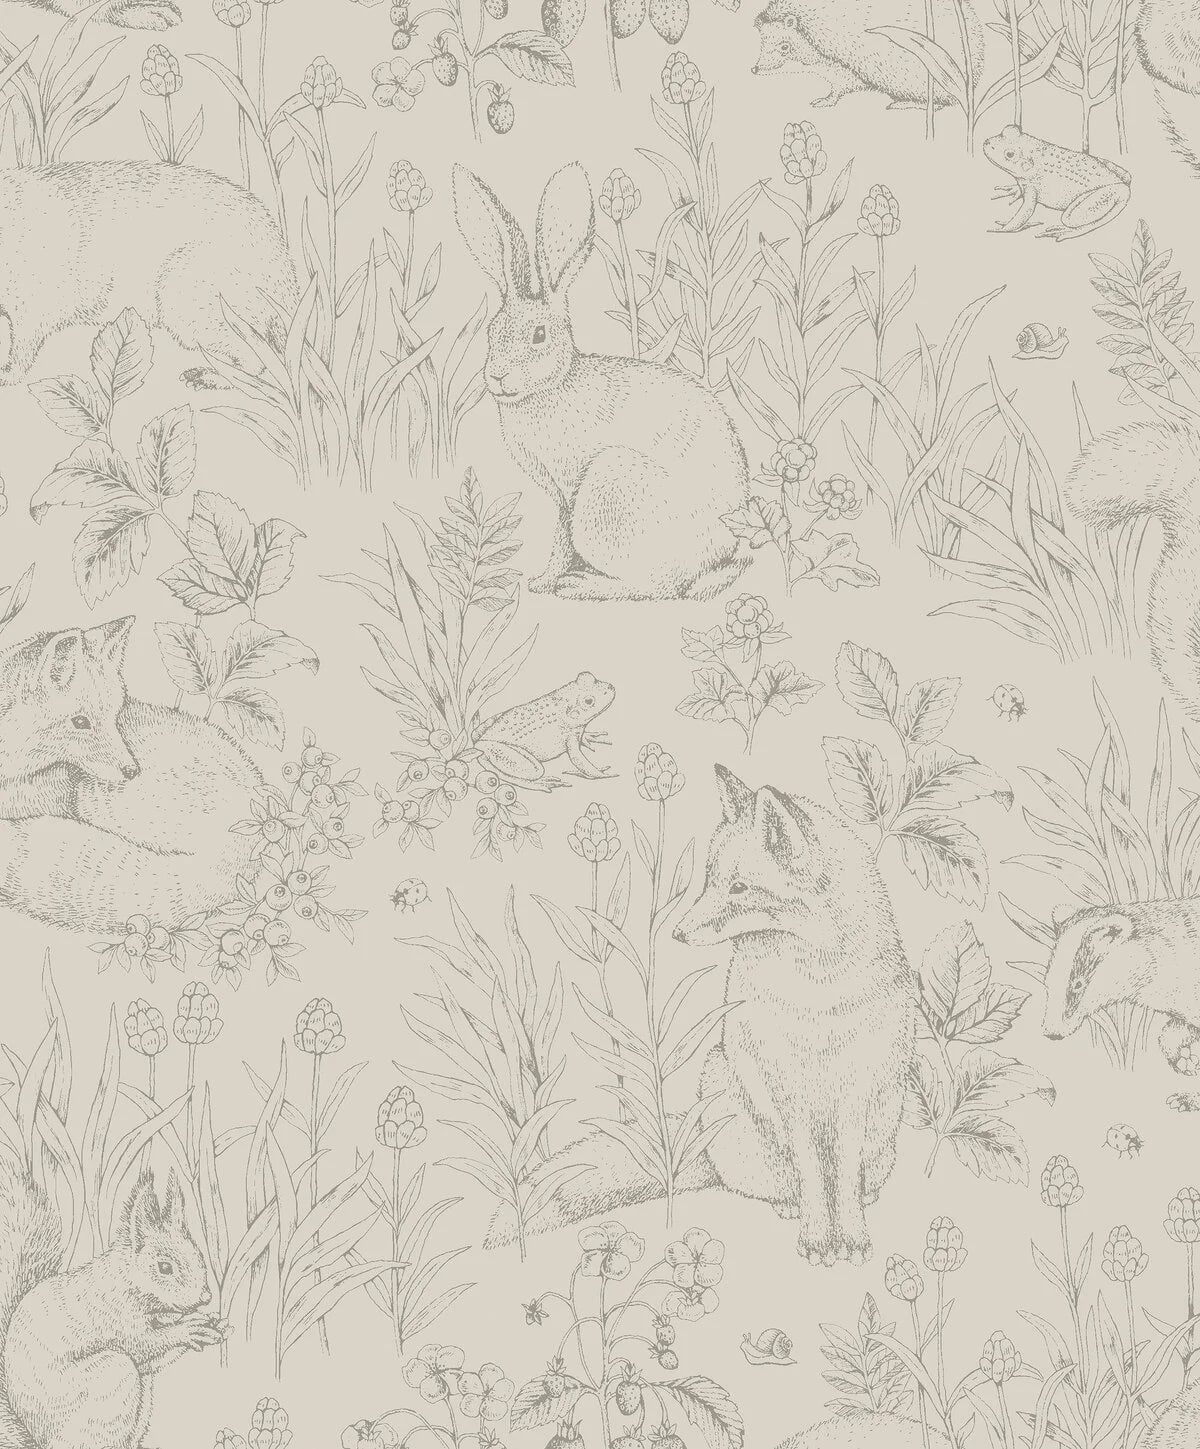 Set on a neutral and airy linen beige backdrop, our Forest Friends children’s wallpaper captures the spirit of the playful and inviting forest.